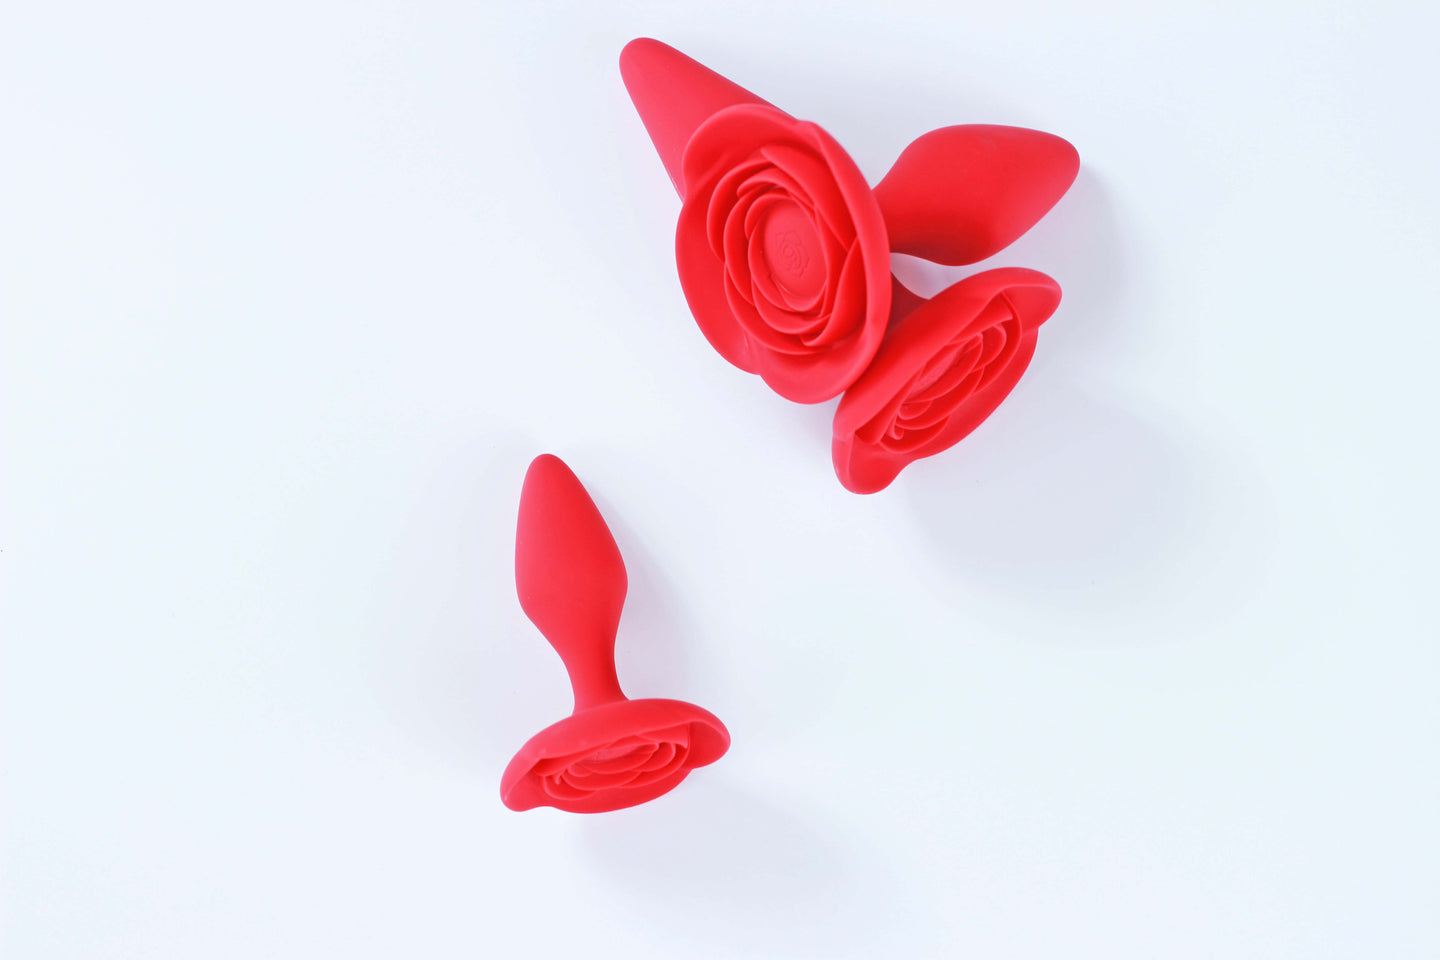 Small red rose butt plug laid in front of medium and large sizes of the same butt plug on white background